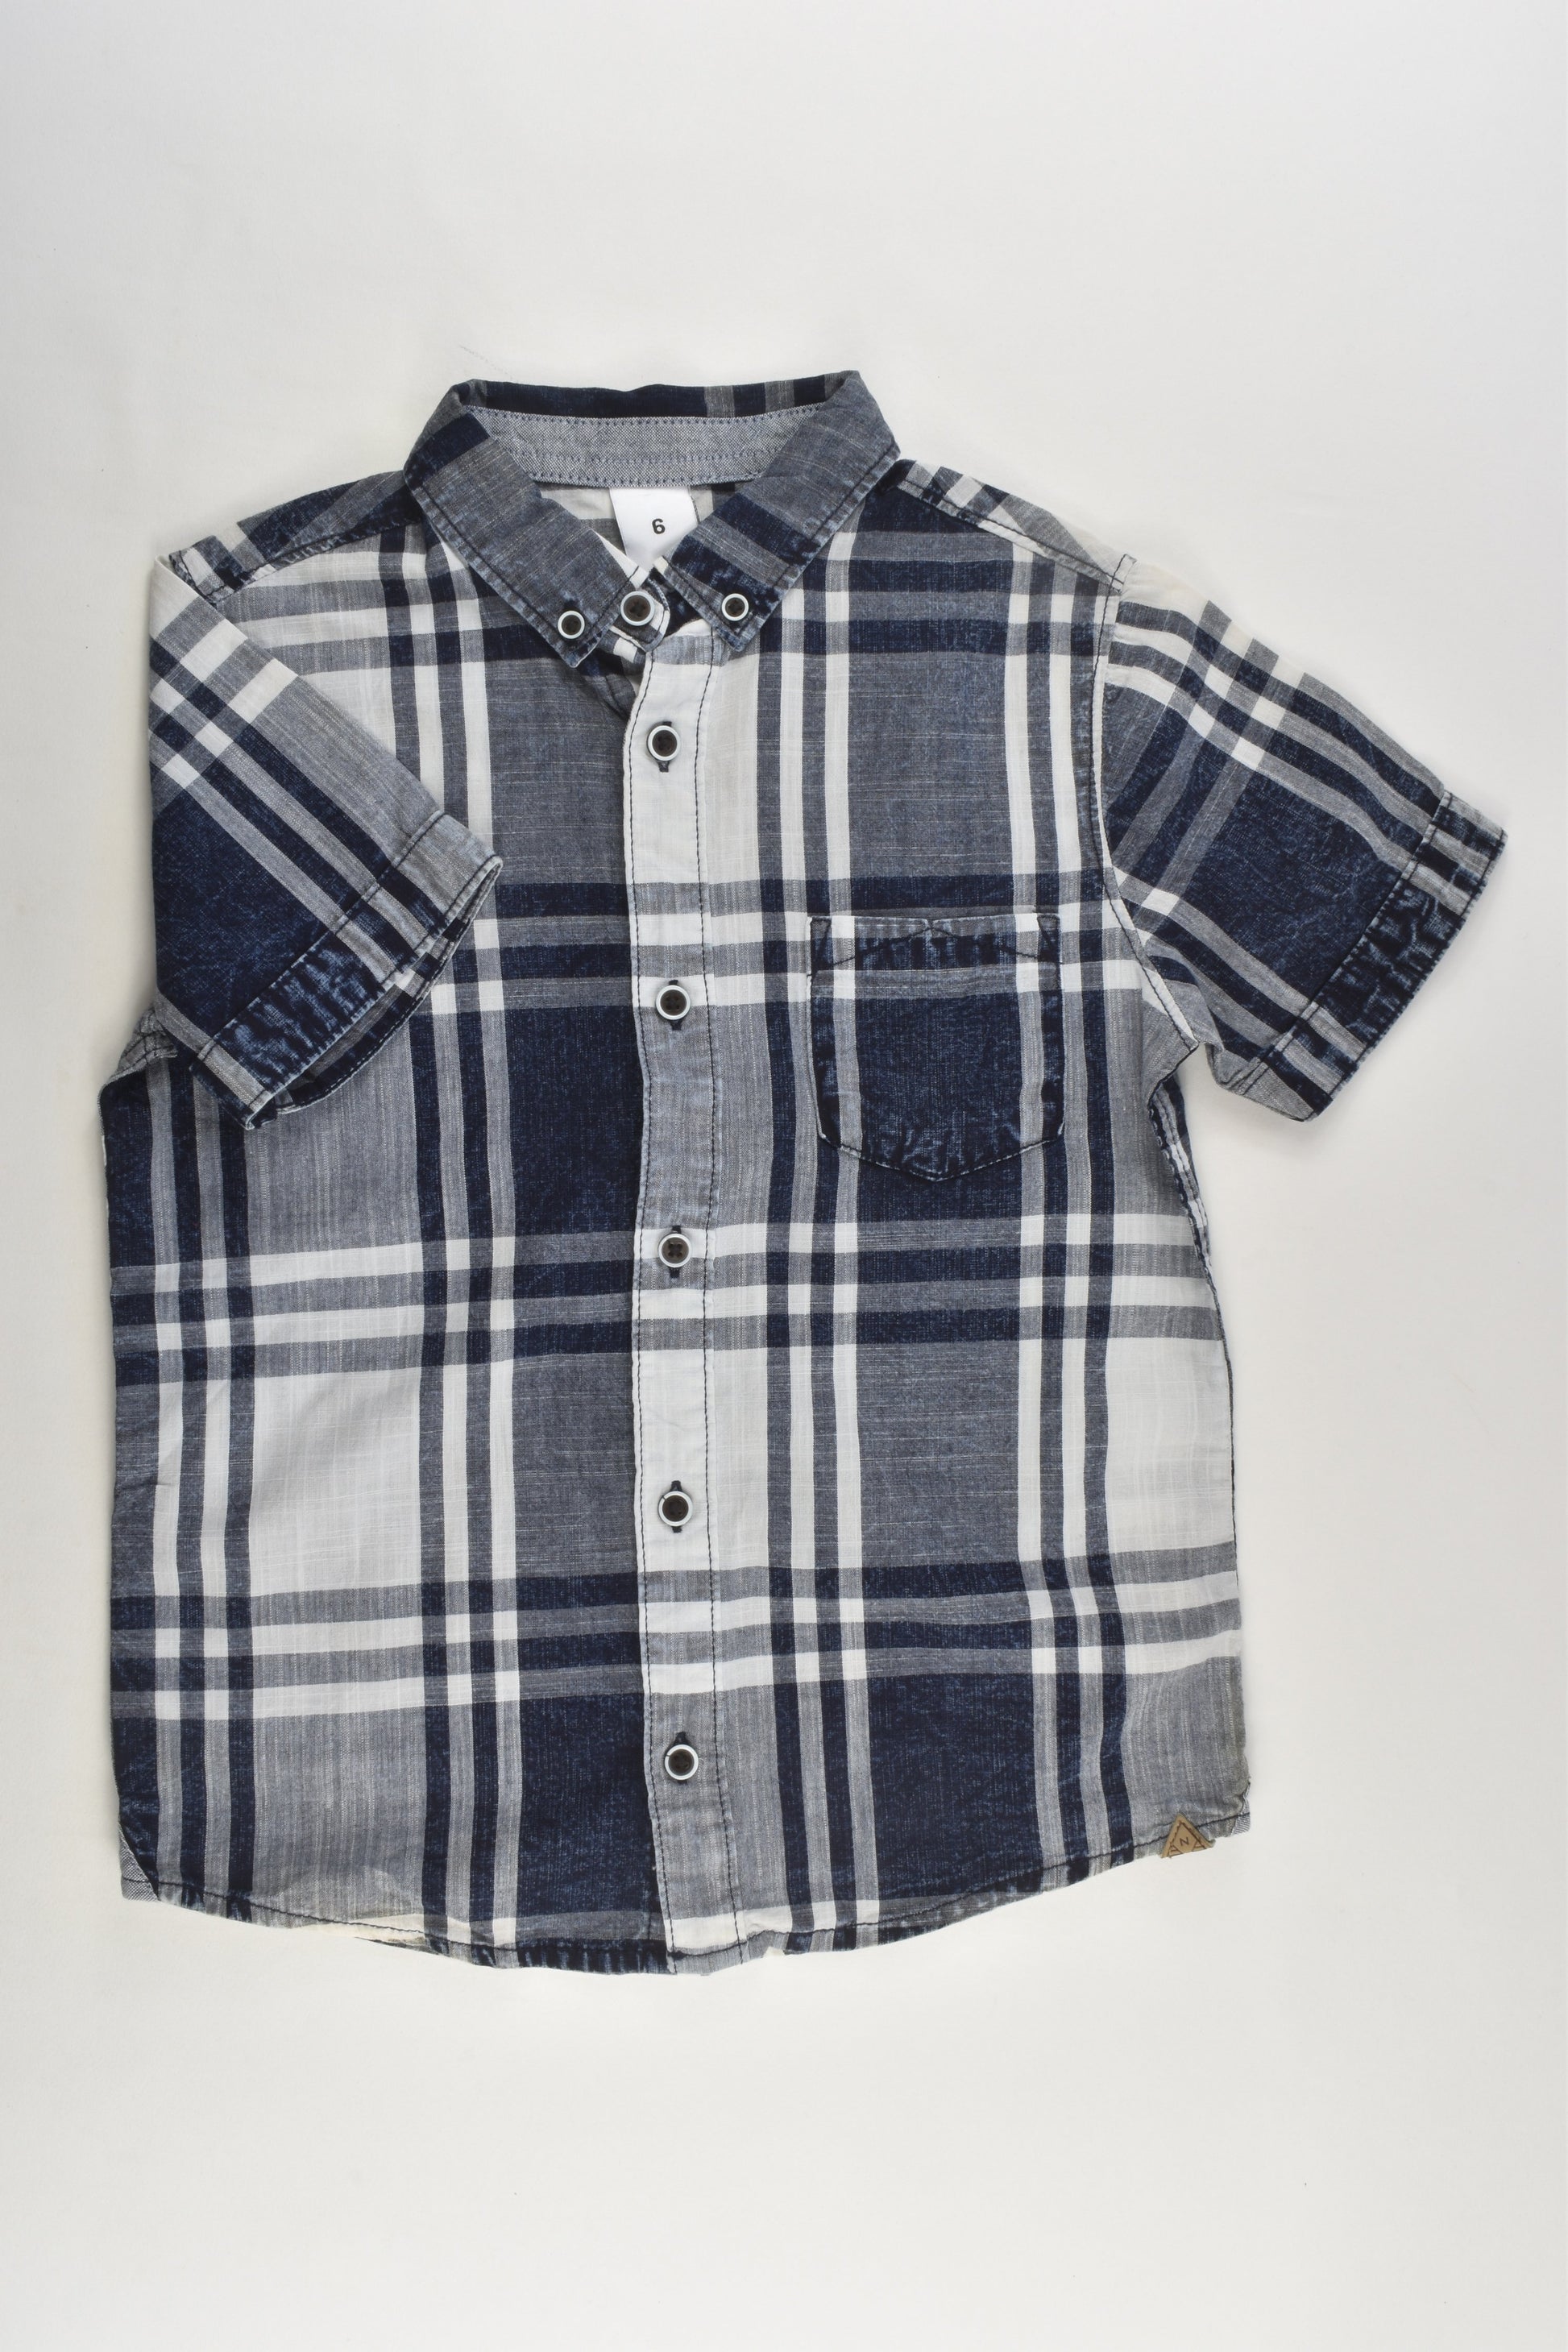 Target Size 6 Checked Shirt